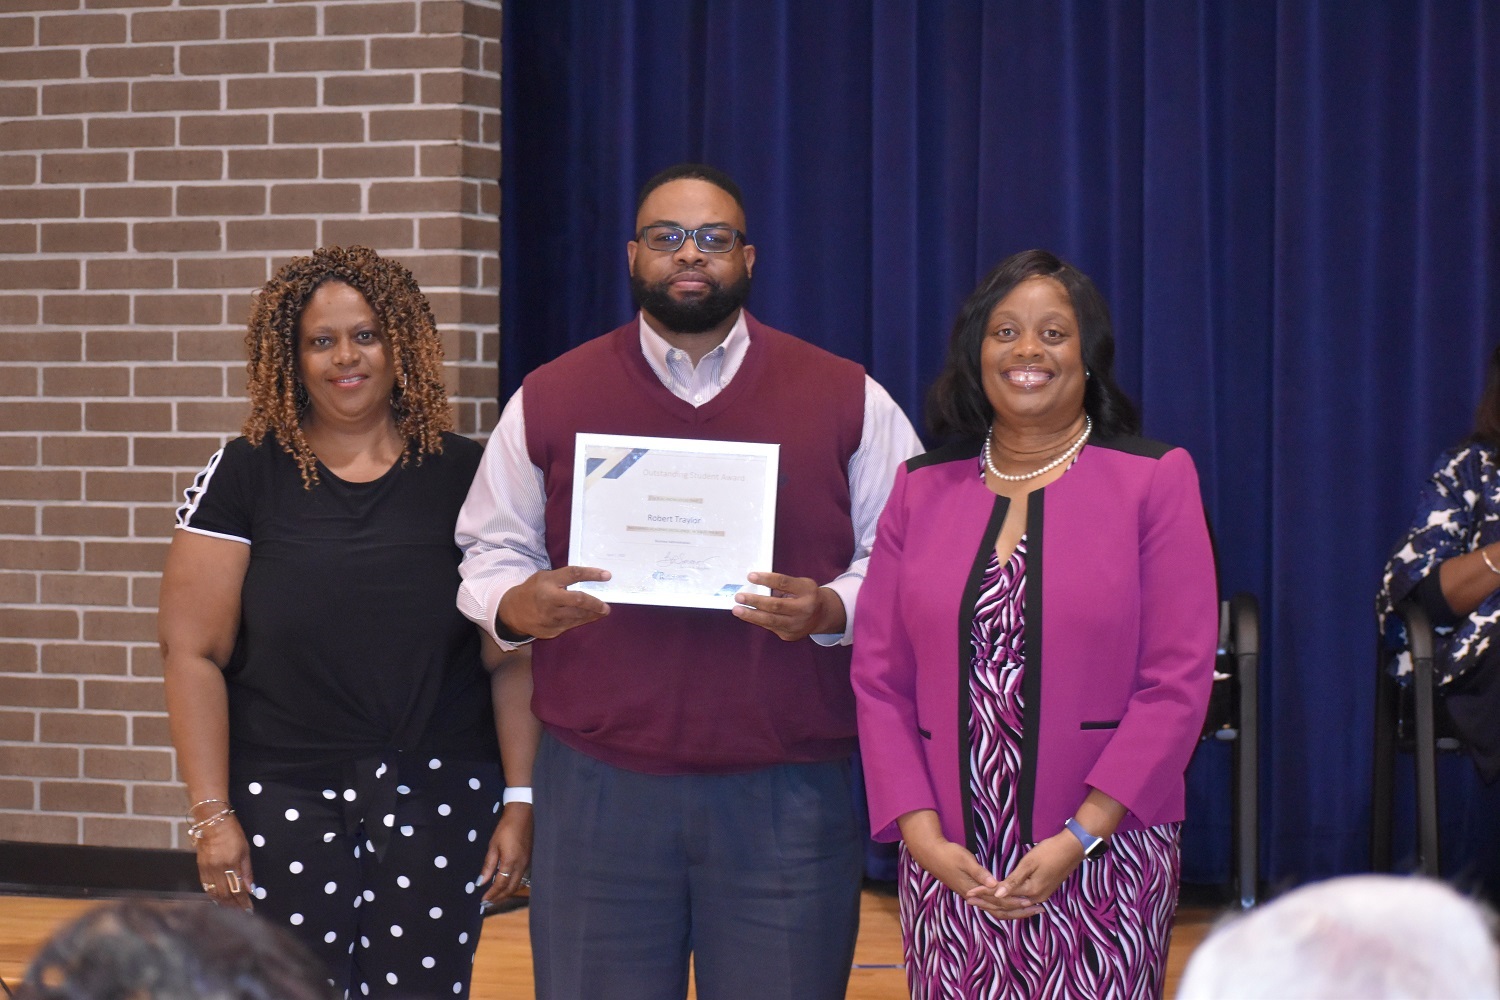 Robert Traylor was awarded the Business Administration Academic Excellence Highest GPA by Beverly Sessoms, Program Coordinator, Medical Office and Office Administration (left) and President Williams.